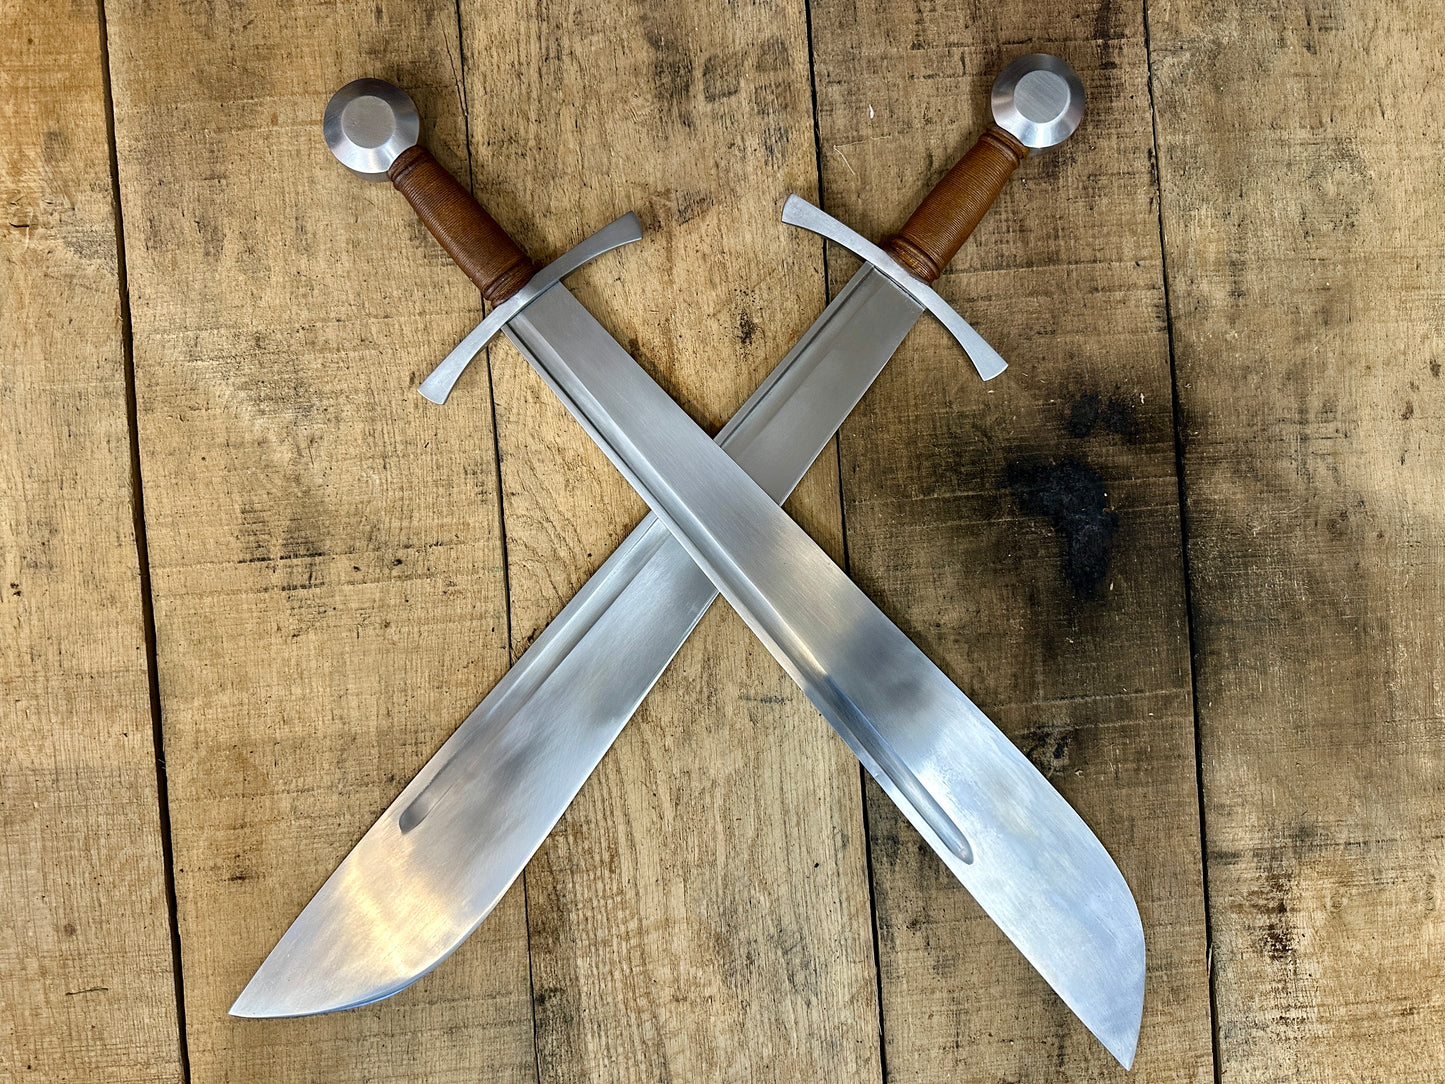 Cleaver Falchion from Tod Cutler. Two blades, crossed.